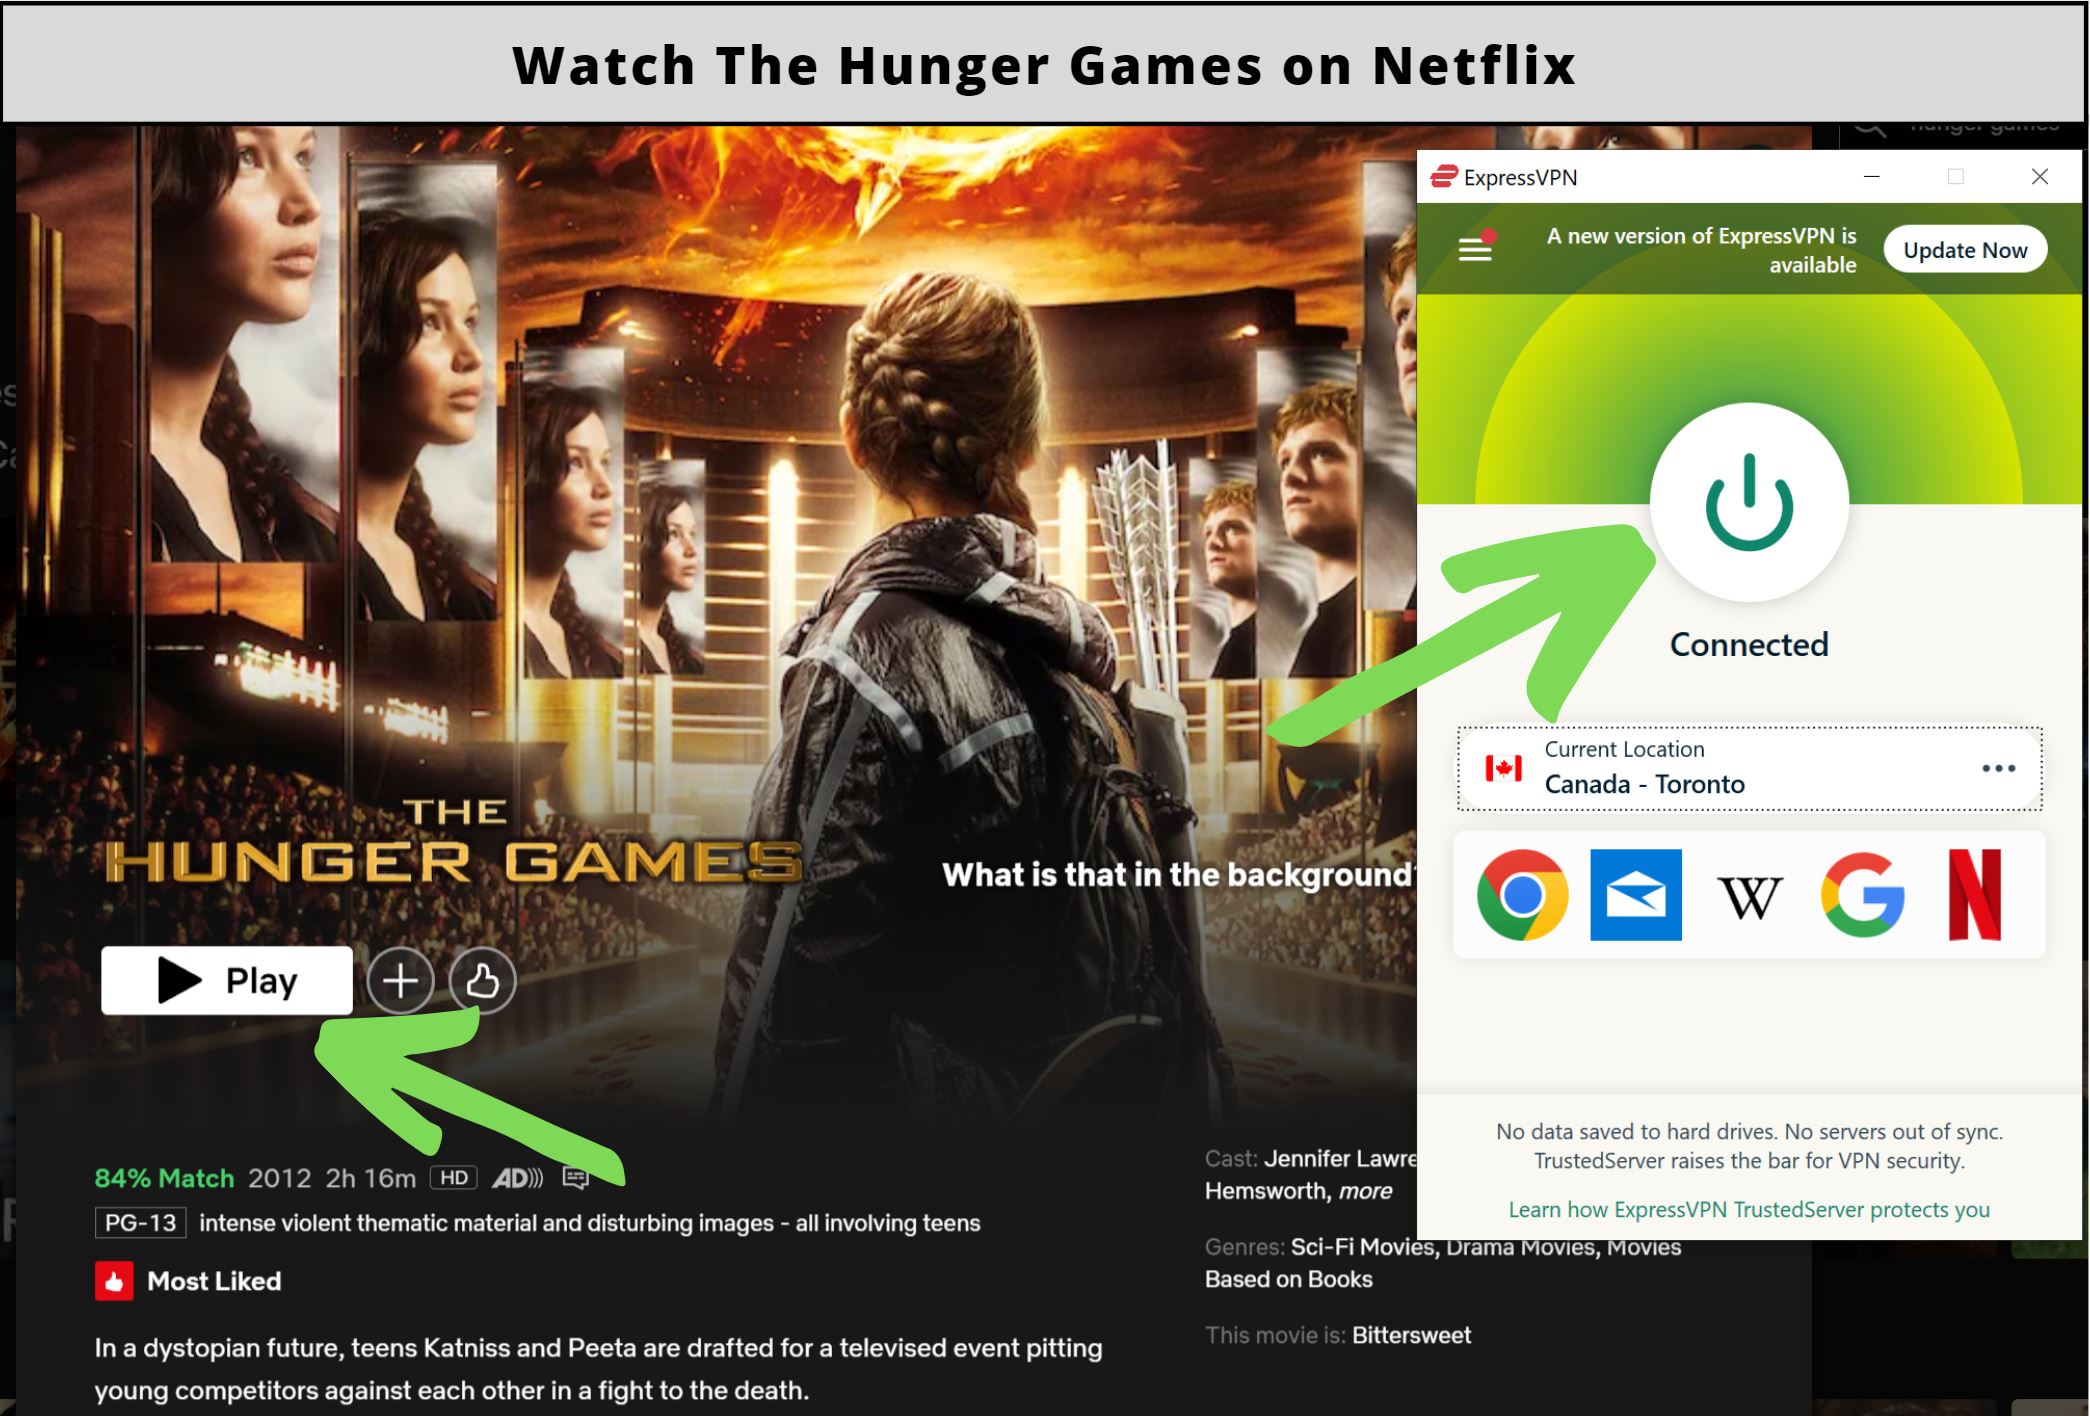 How to watch The Hunger Games on Netflix